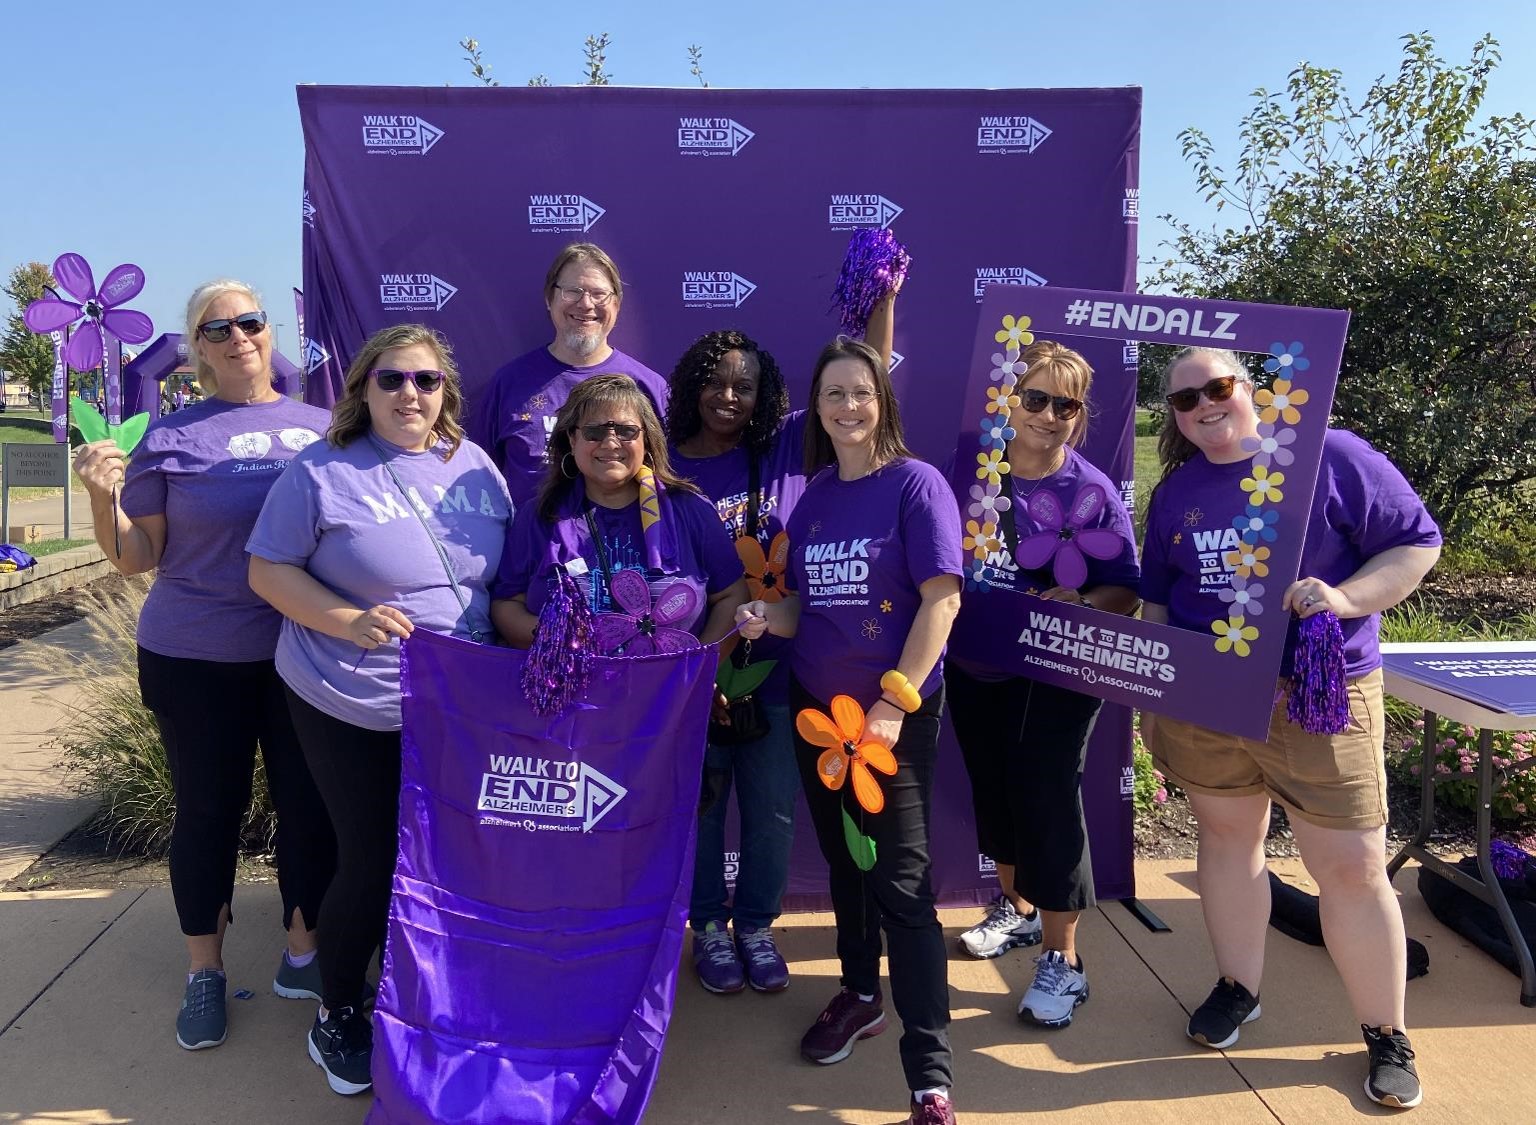 Team Loggers pose at the Walk to End Alzheimer’s photo booth. L to R: Bobbi Henry, Kassie Thompson, Kirk Yenerall, Marina Wirsing, Laurie Clemons, Leslie Johnson, Karen Sanders and Carley Young. 